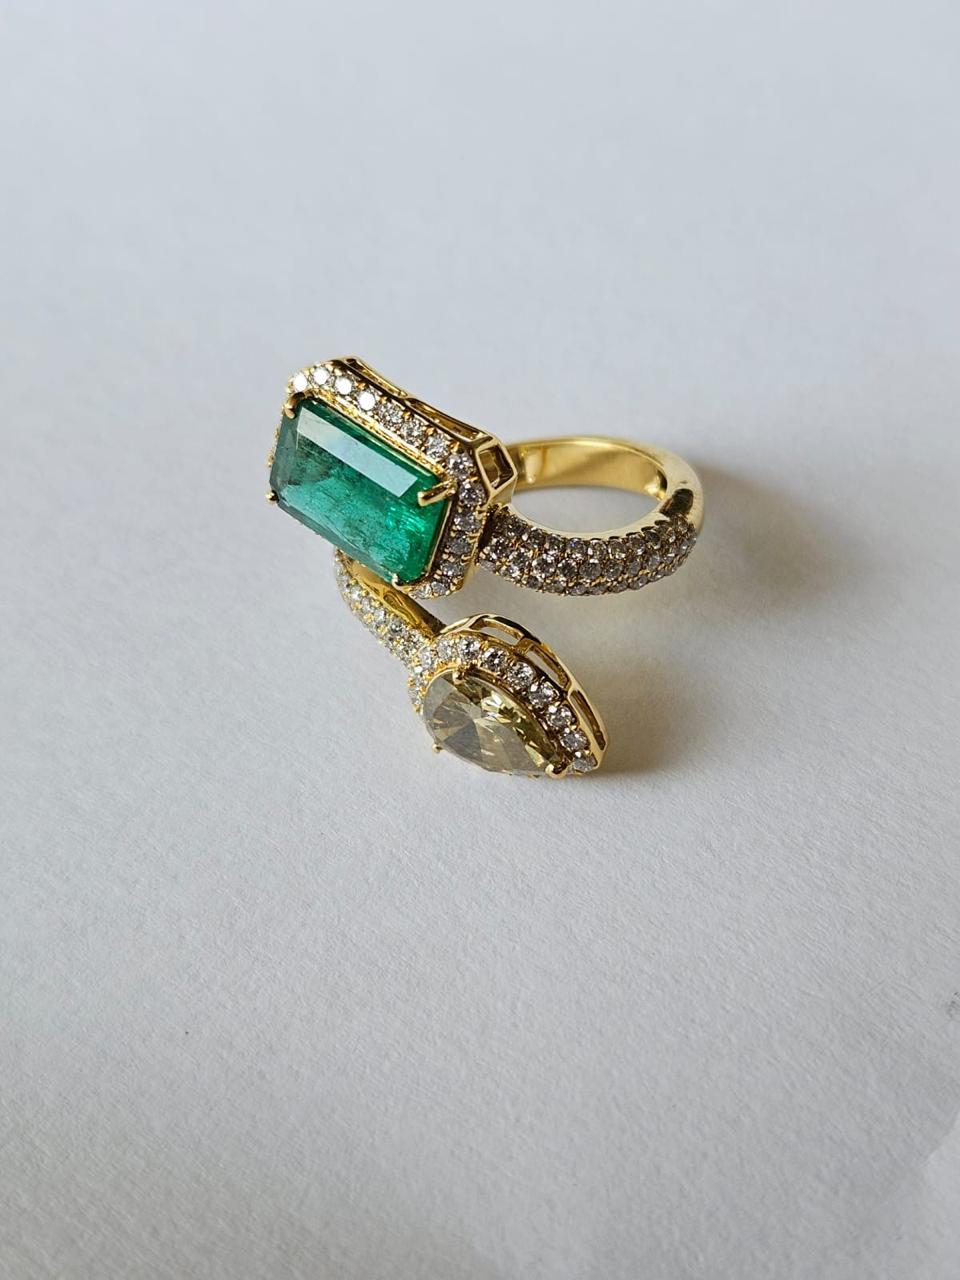 A very gorgeous and beautiful, modern style, Emerald Engagement Ring set in 18K Yellow Gold & Diamonds. The weight of the Emerald is 2.34 carats. The Emerald is completely natural, without any treatment and is of Zambian origin. The combined